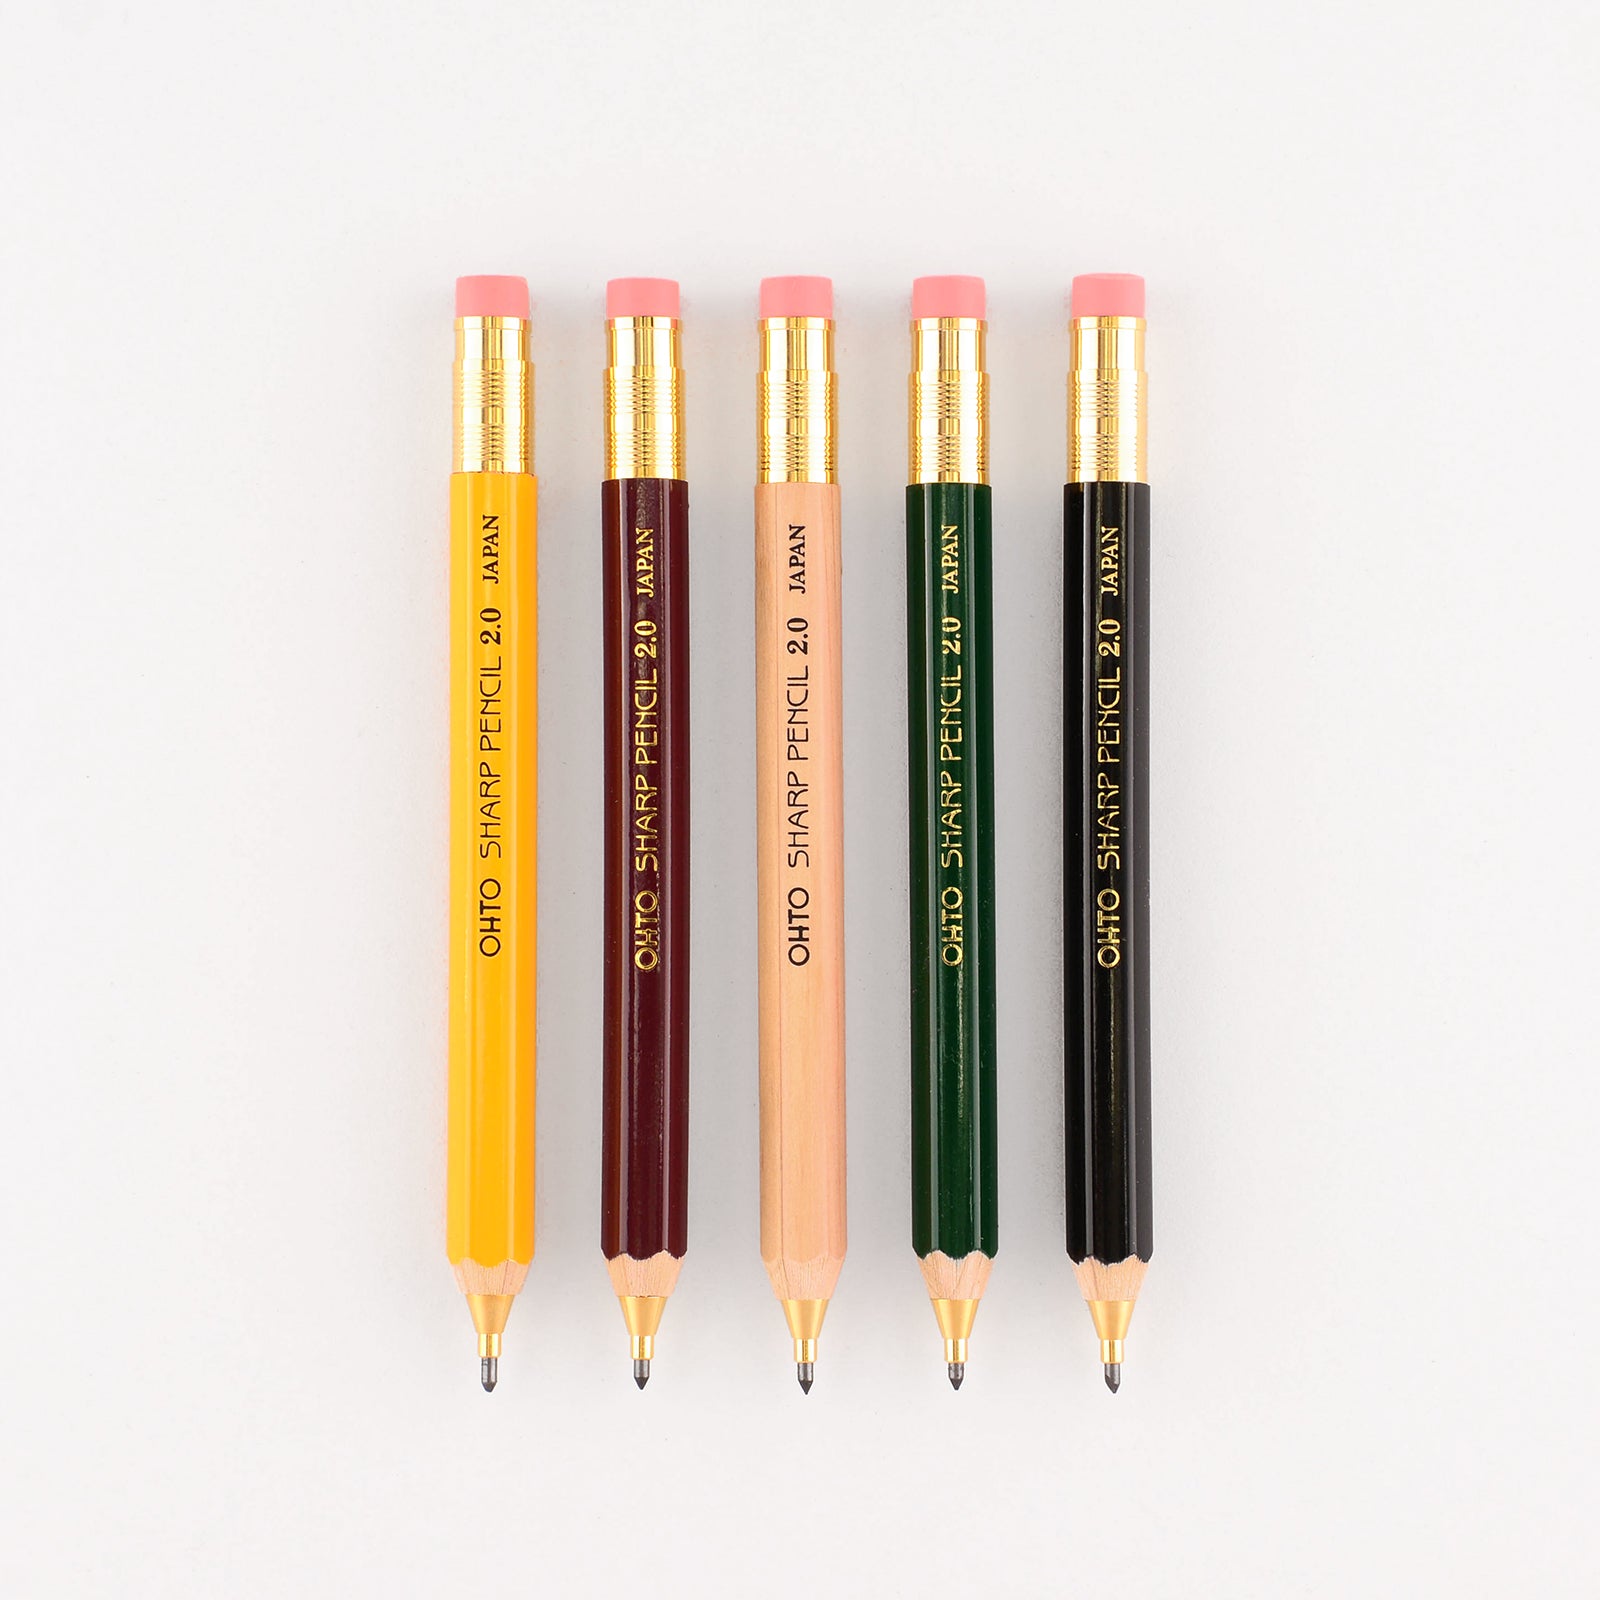 Ohto Ohto Wooden Mechanical Pencil 2.0 mm | 5 colors 